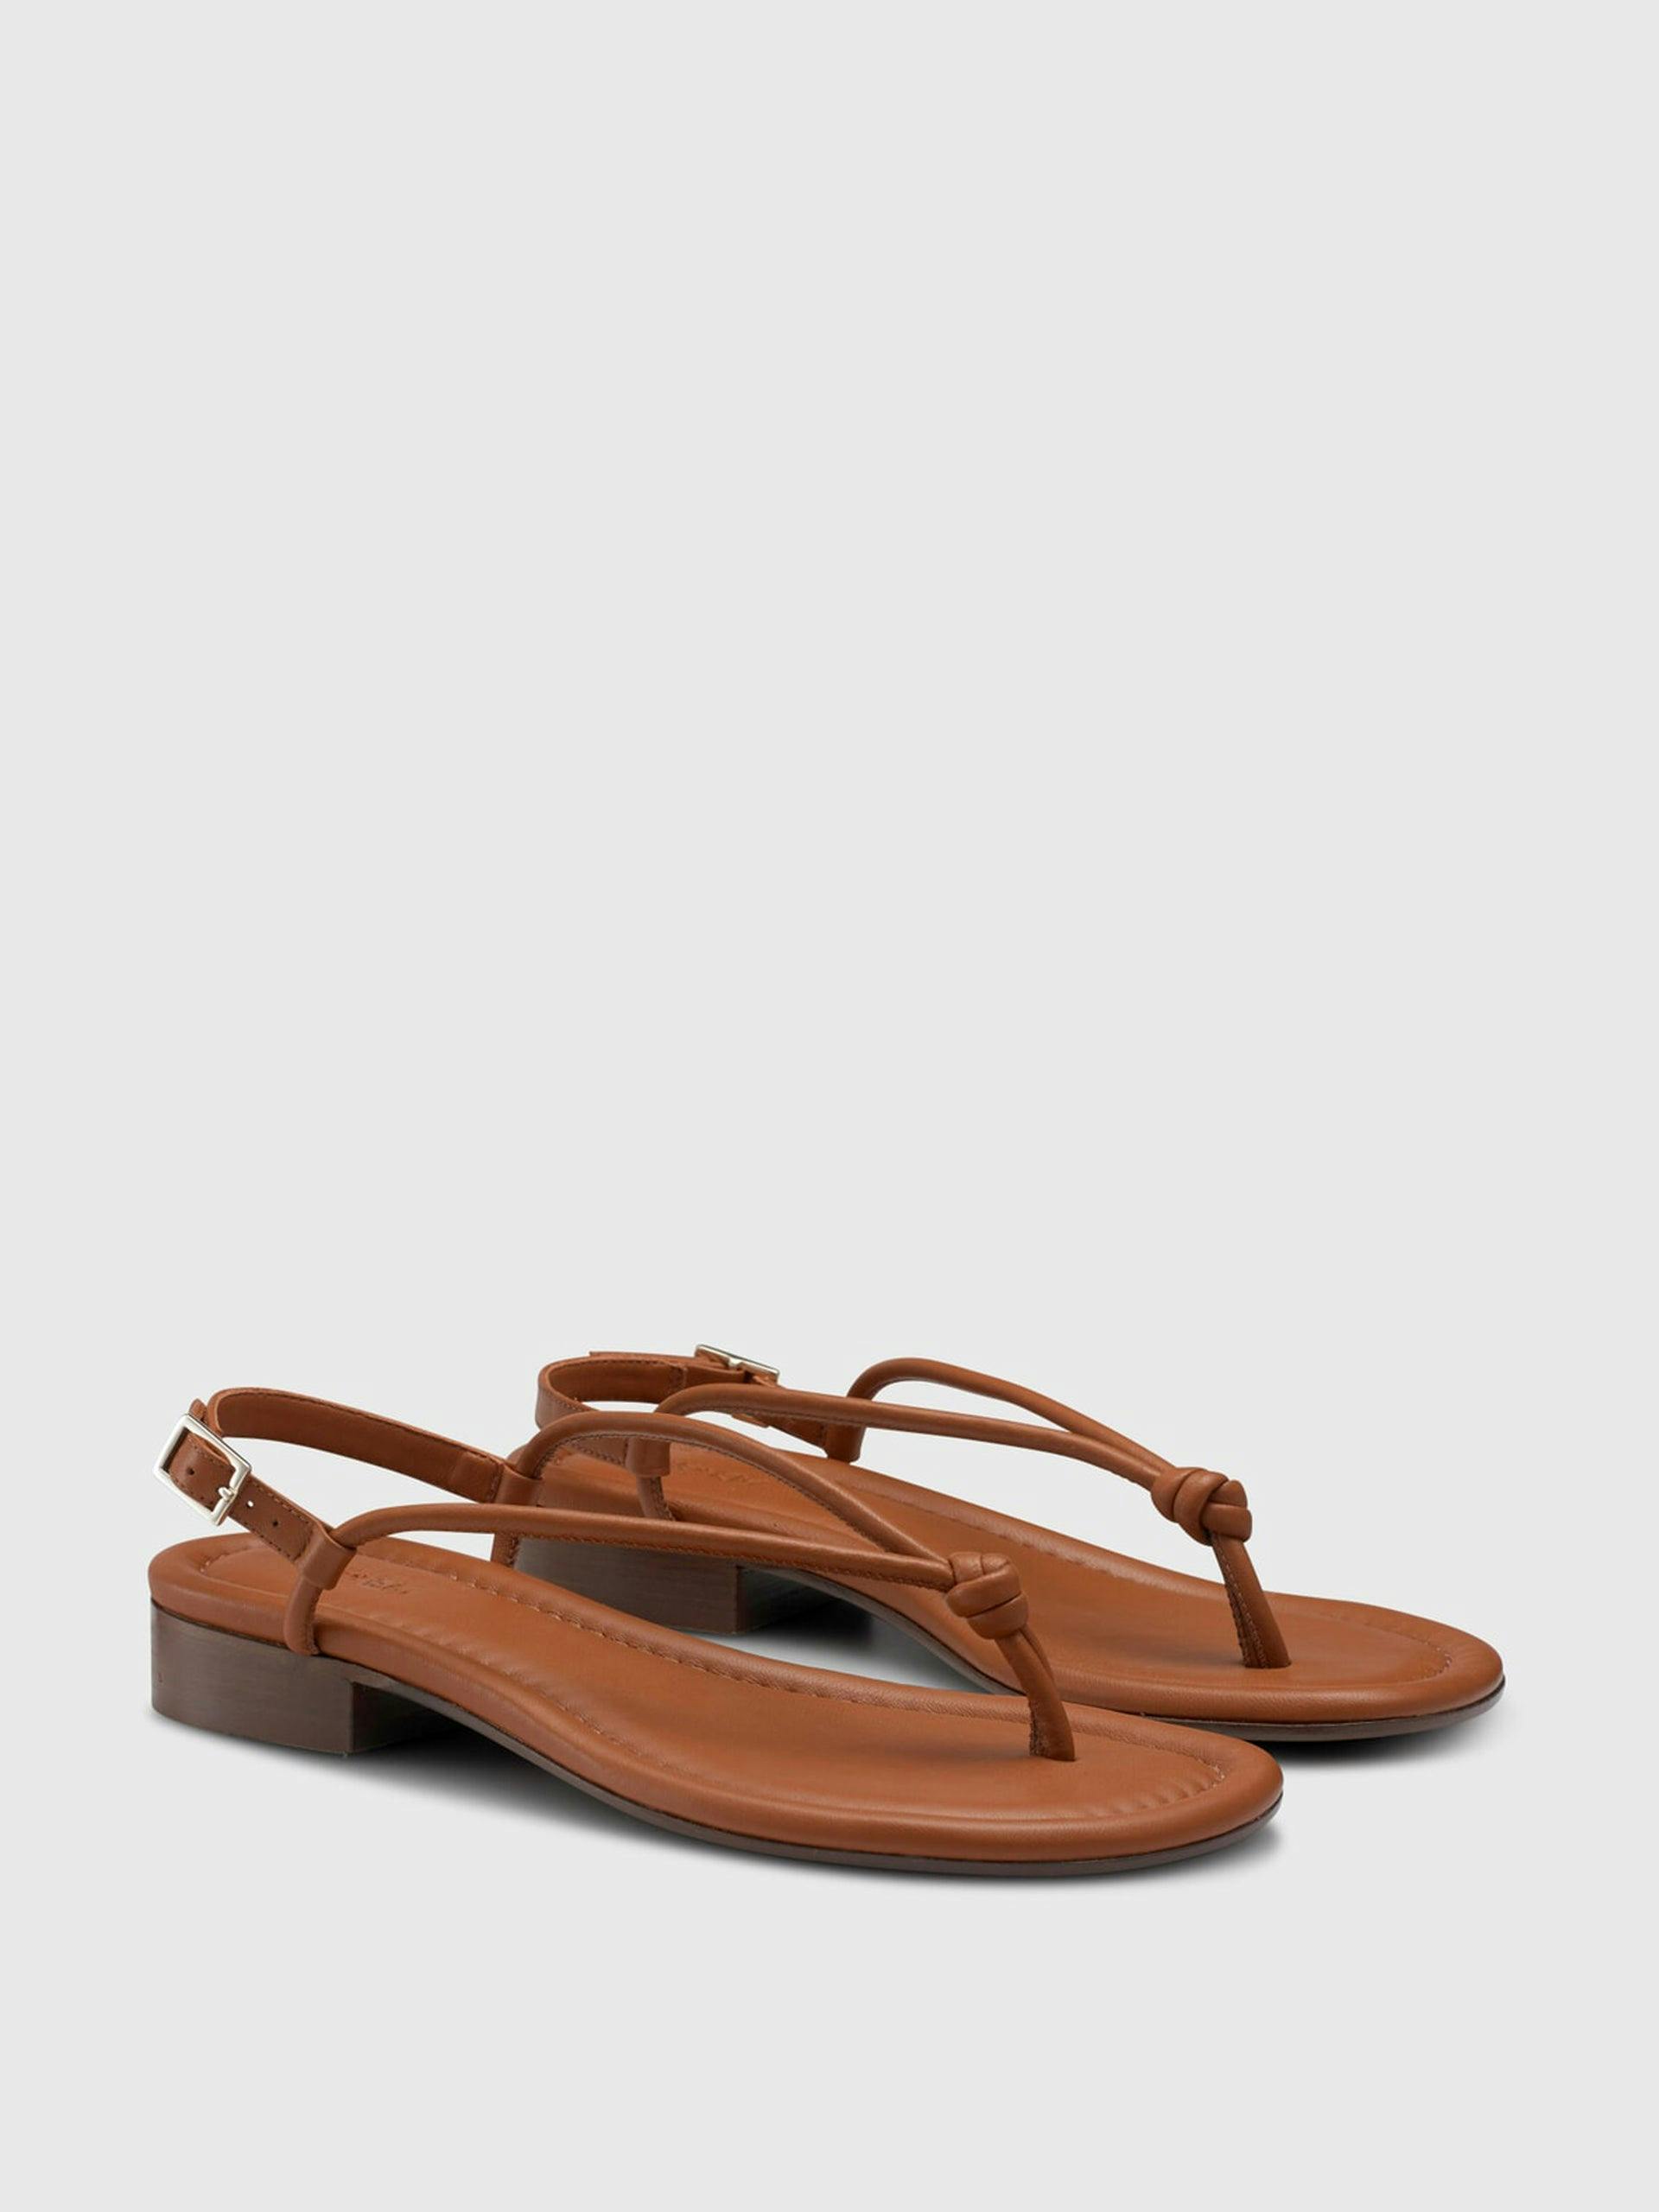 Brown leather knot-detail sandals